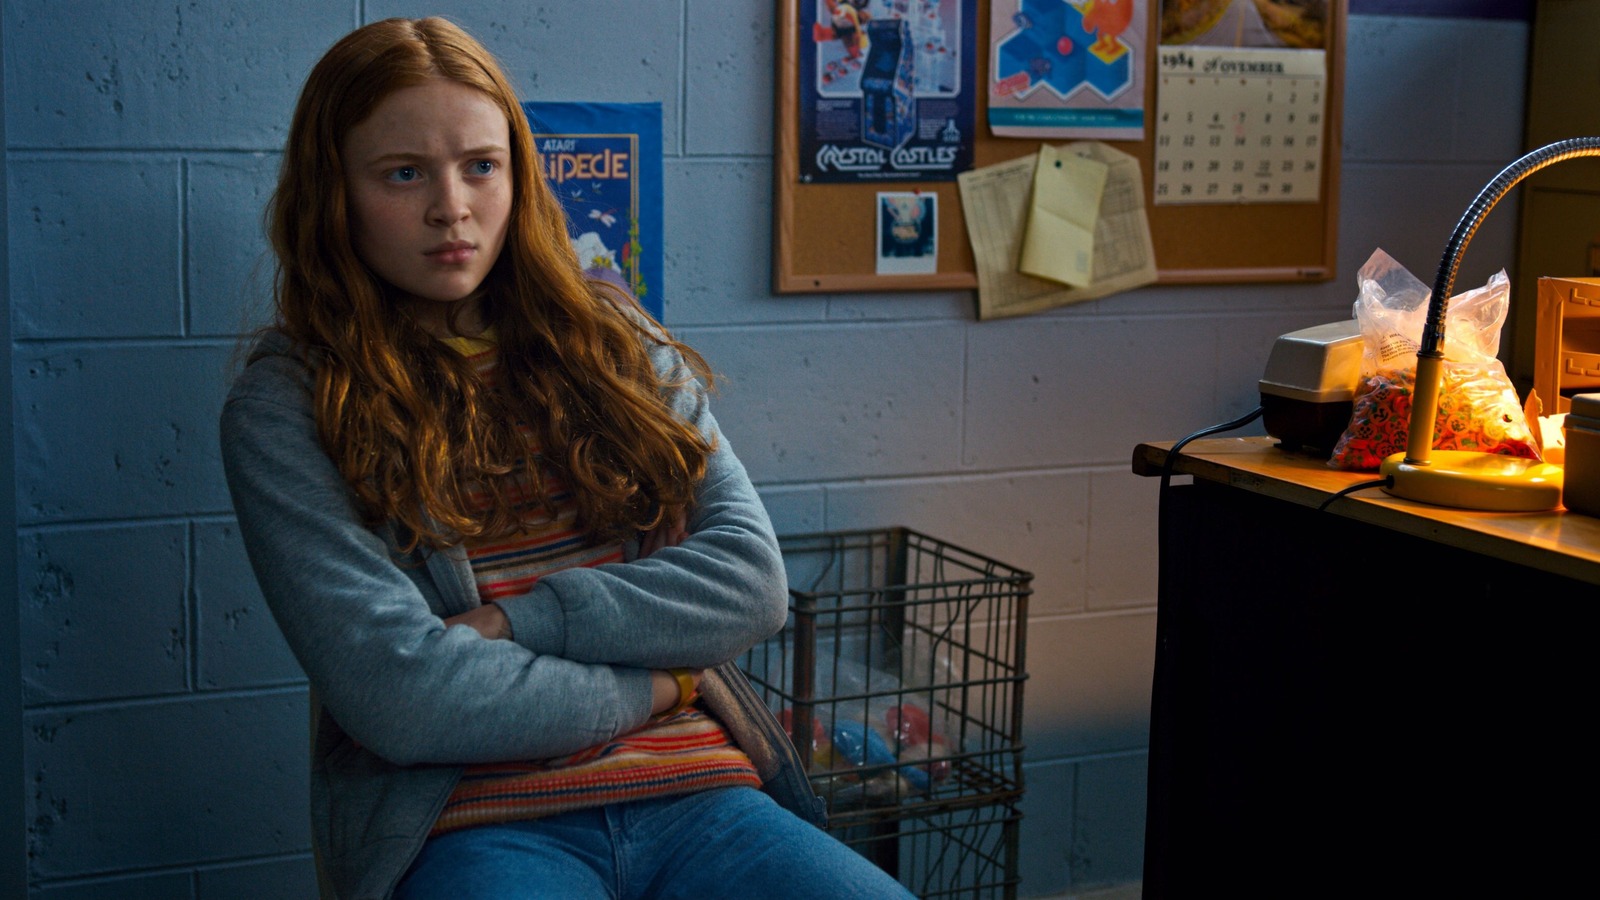 #Sadie Sink Reveals The Song That Could Get Her Out Of The Upside Down